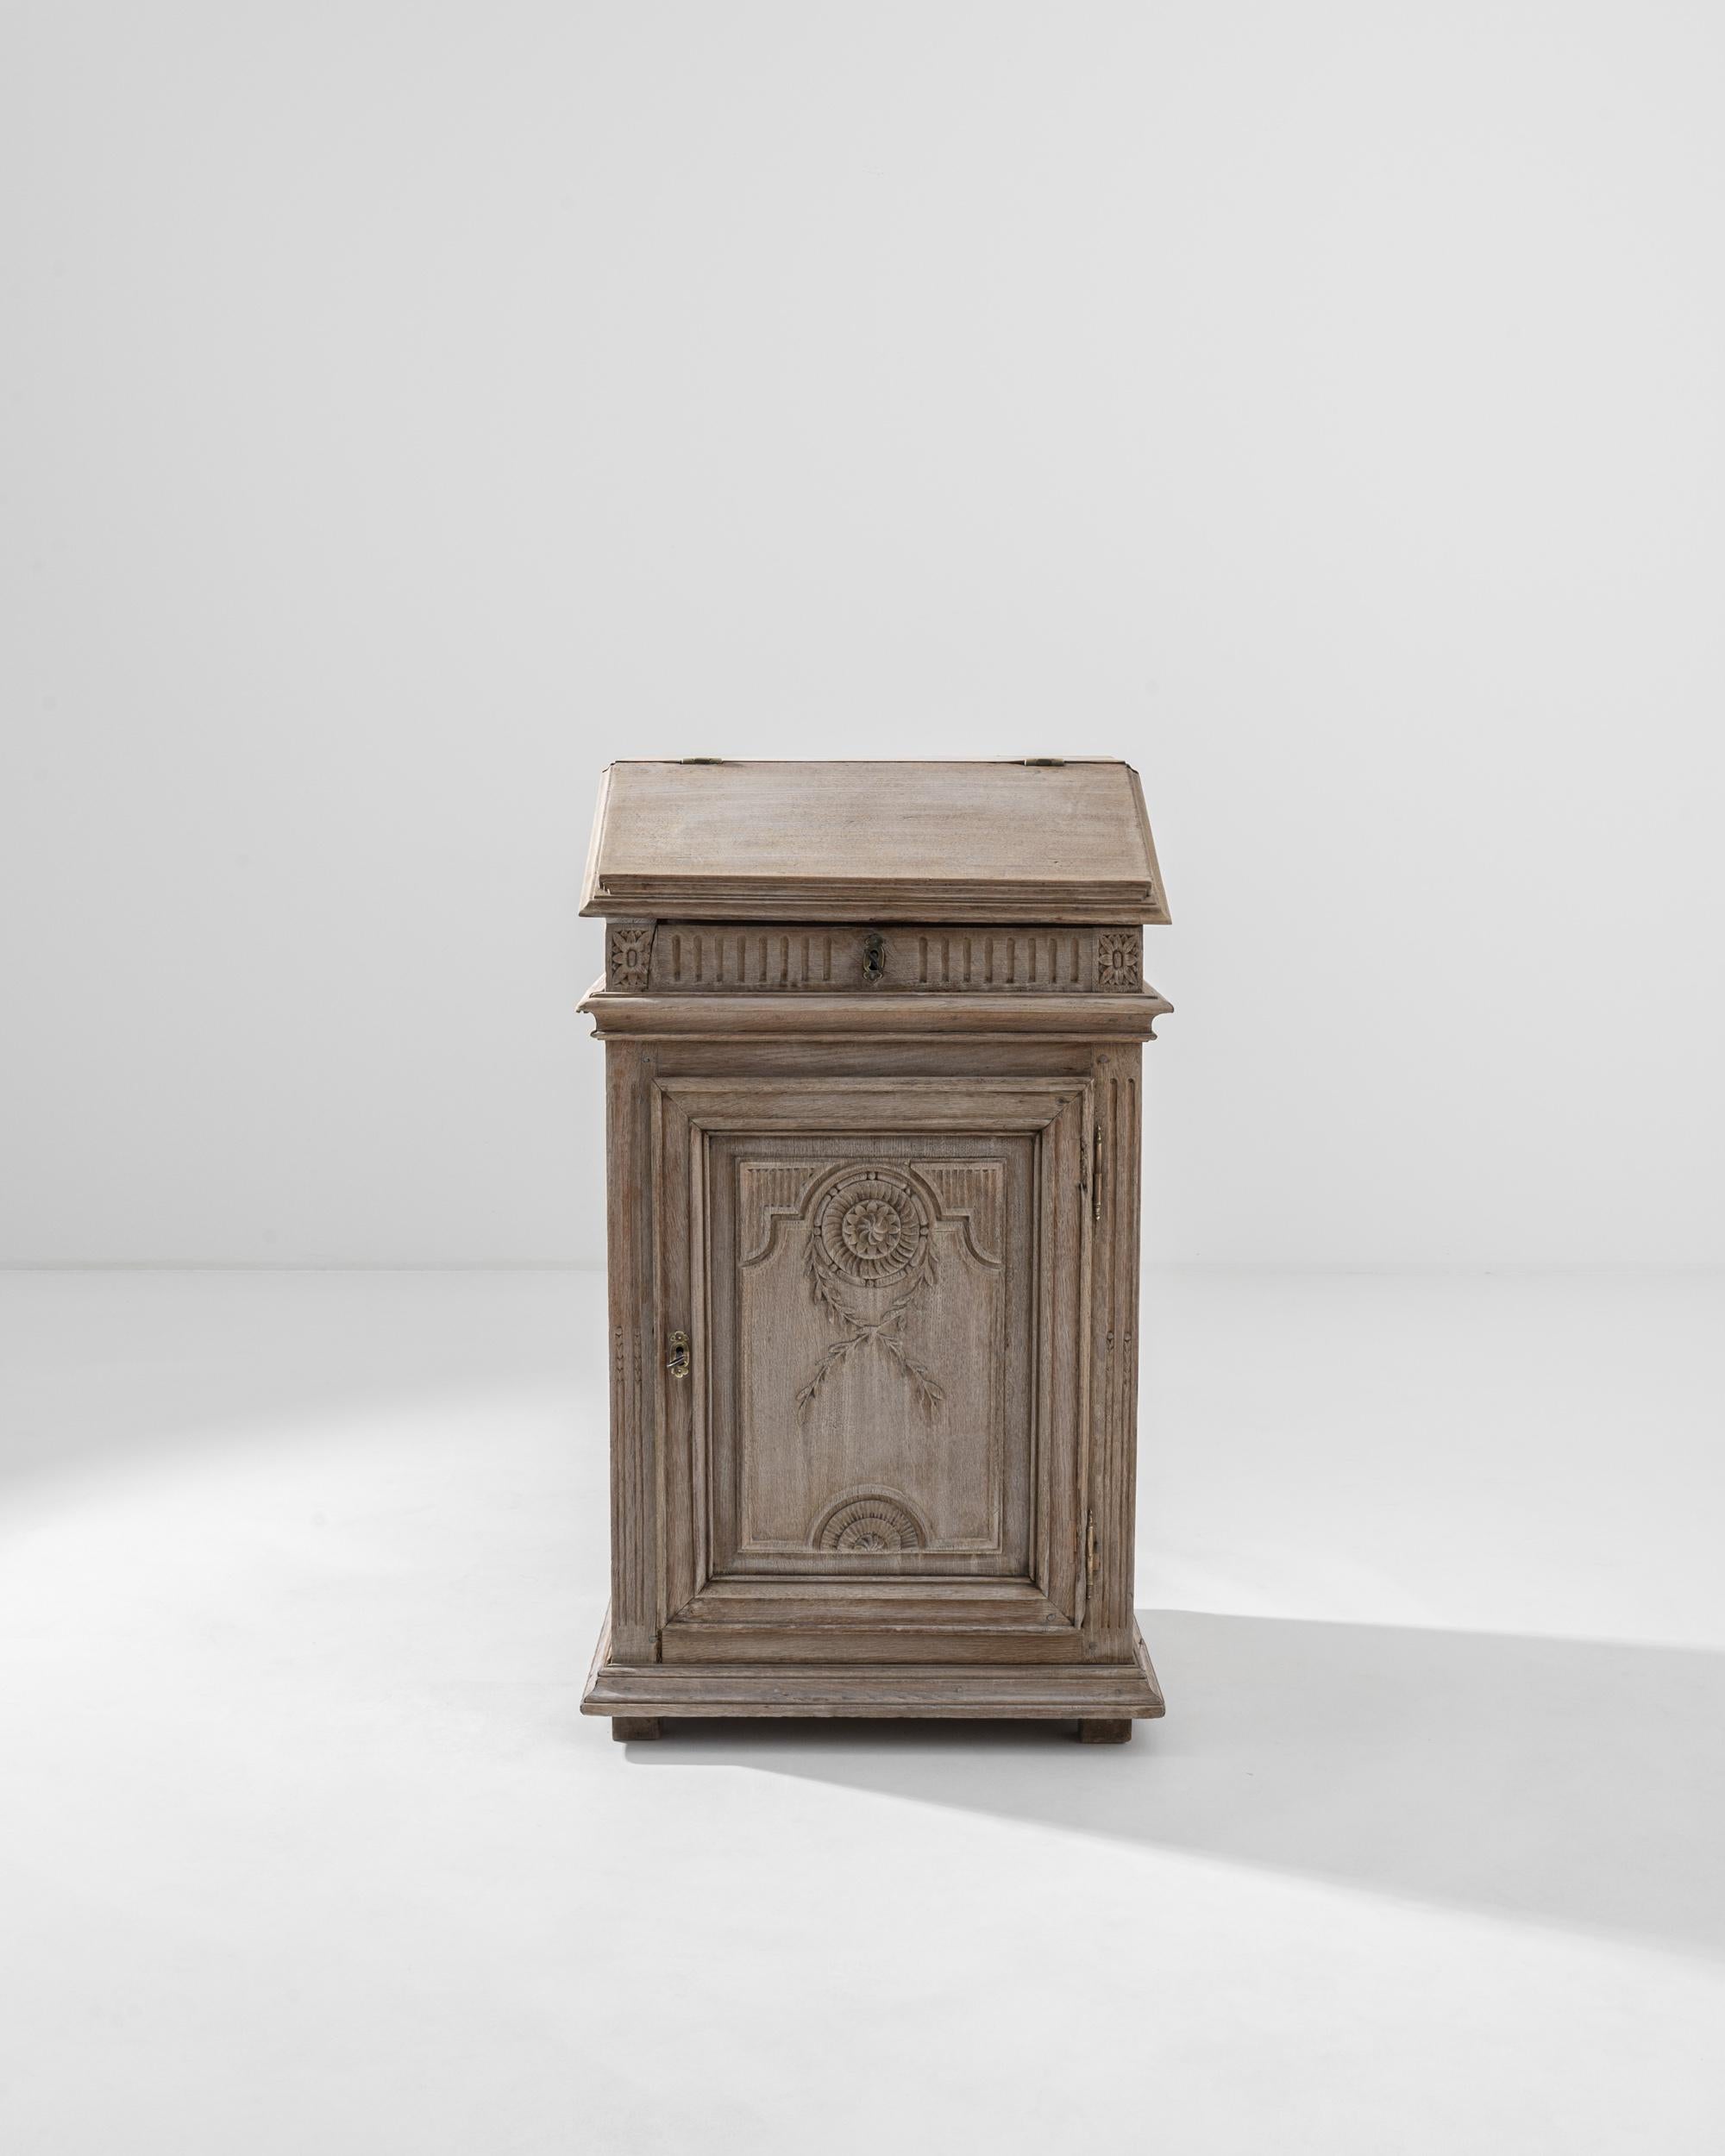 A wooden desk made in 19th century, France. This tall desk has been carefully bleached so as to enhance its natural oak surface and highlight the elaborate carvings that adorn its surface– bringing new urgency to lessons from the past. A mesmerizing